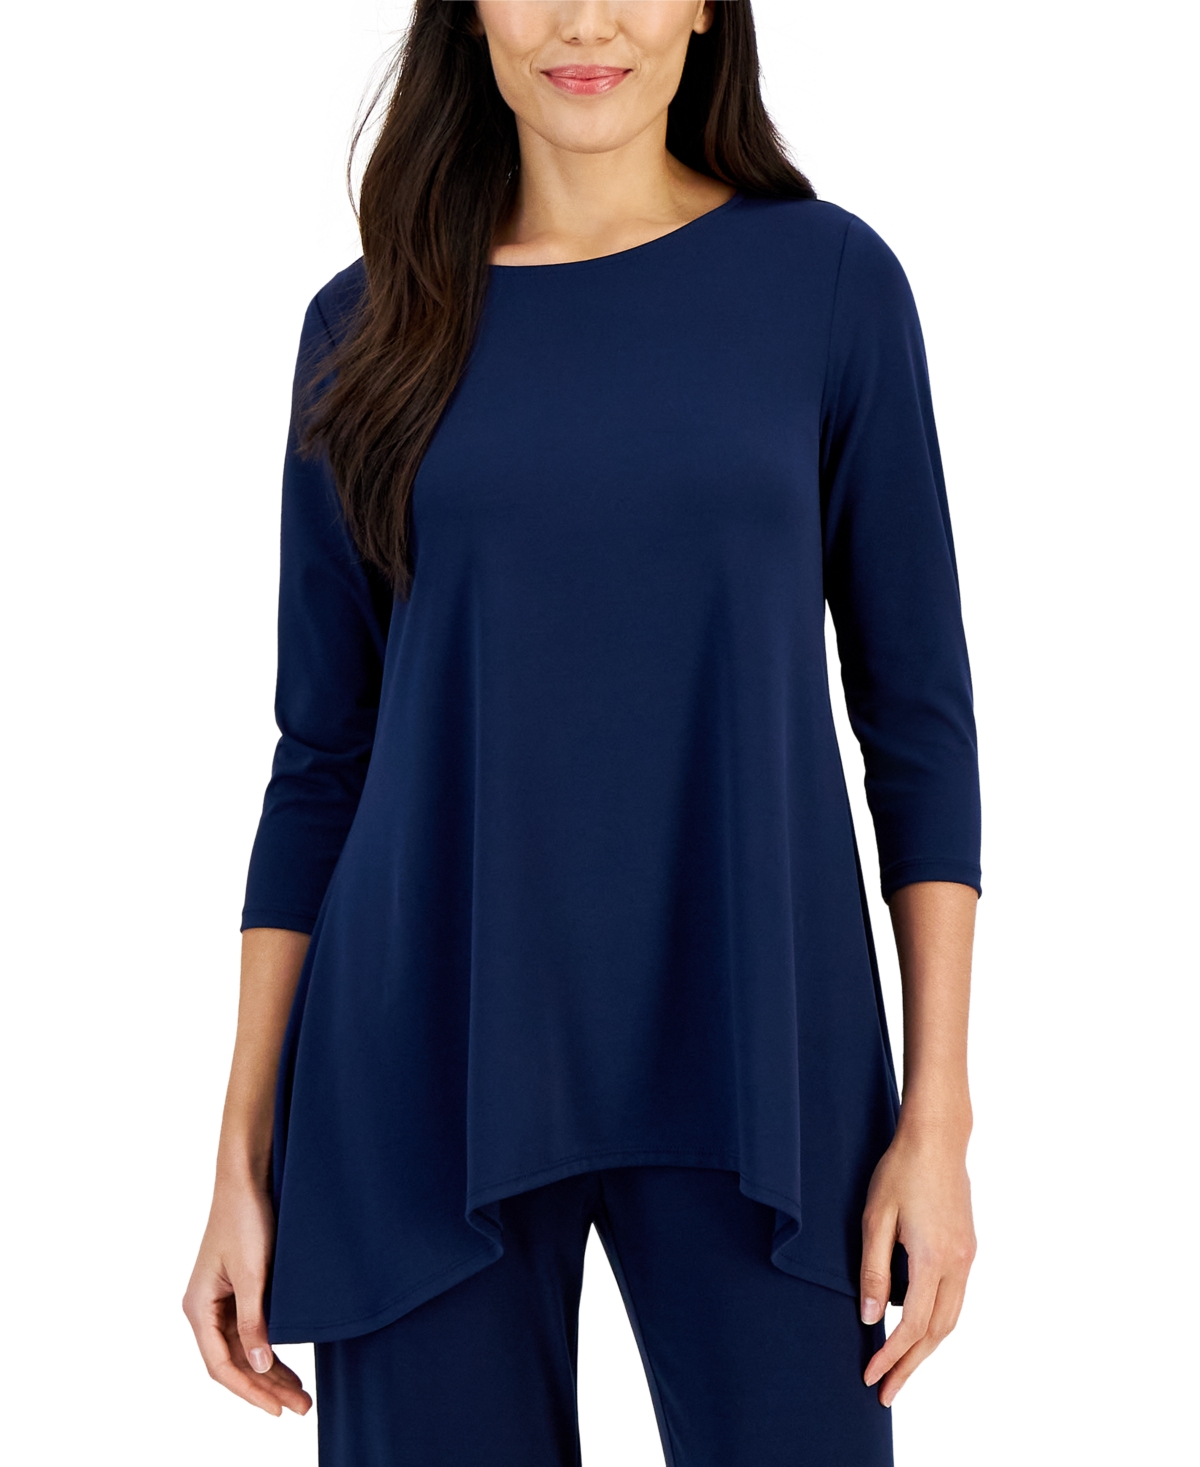 Women's 3/4-Sleeve Knit Top, Regular & Petite, Created for Macy's - Firewood